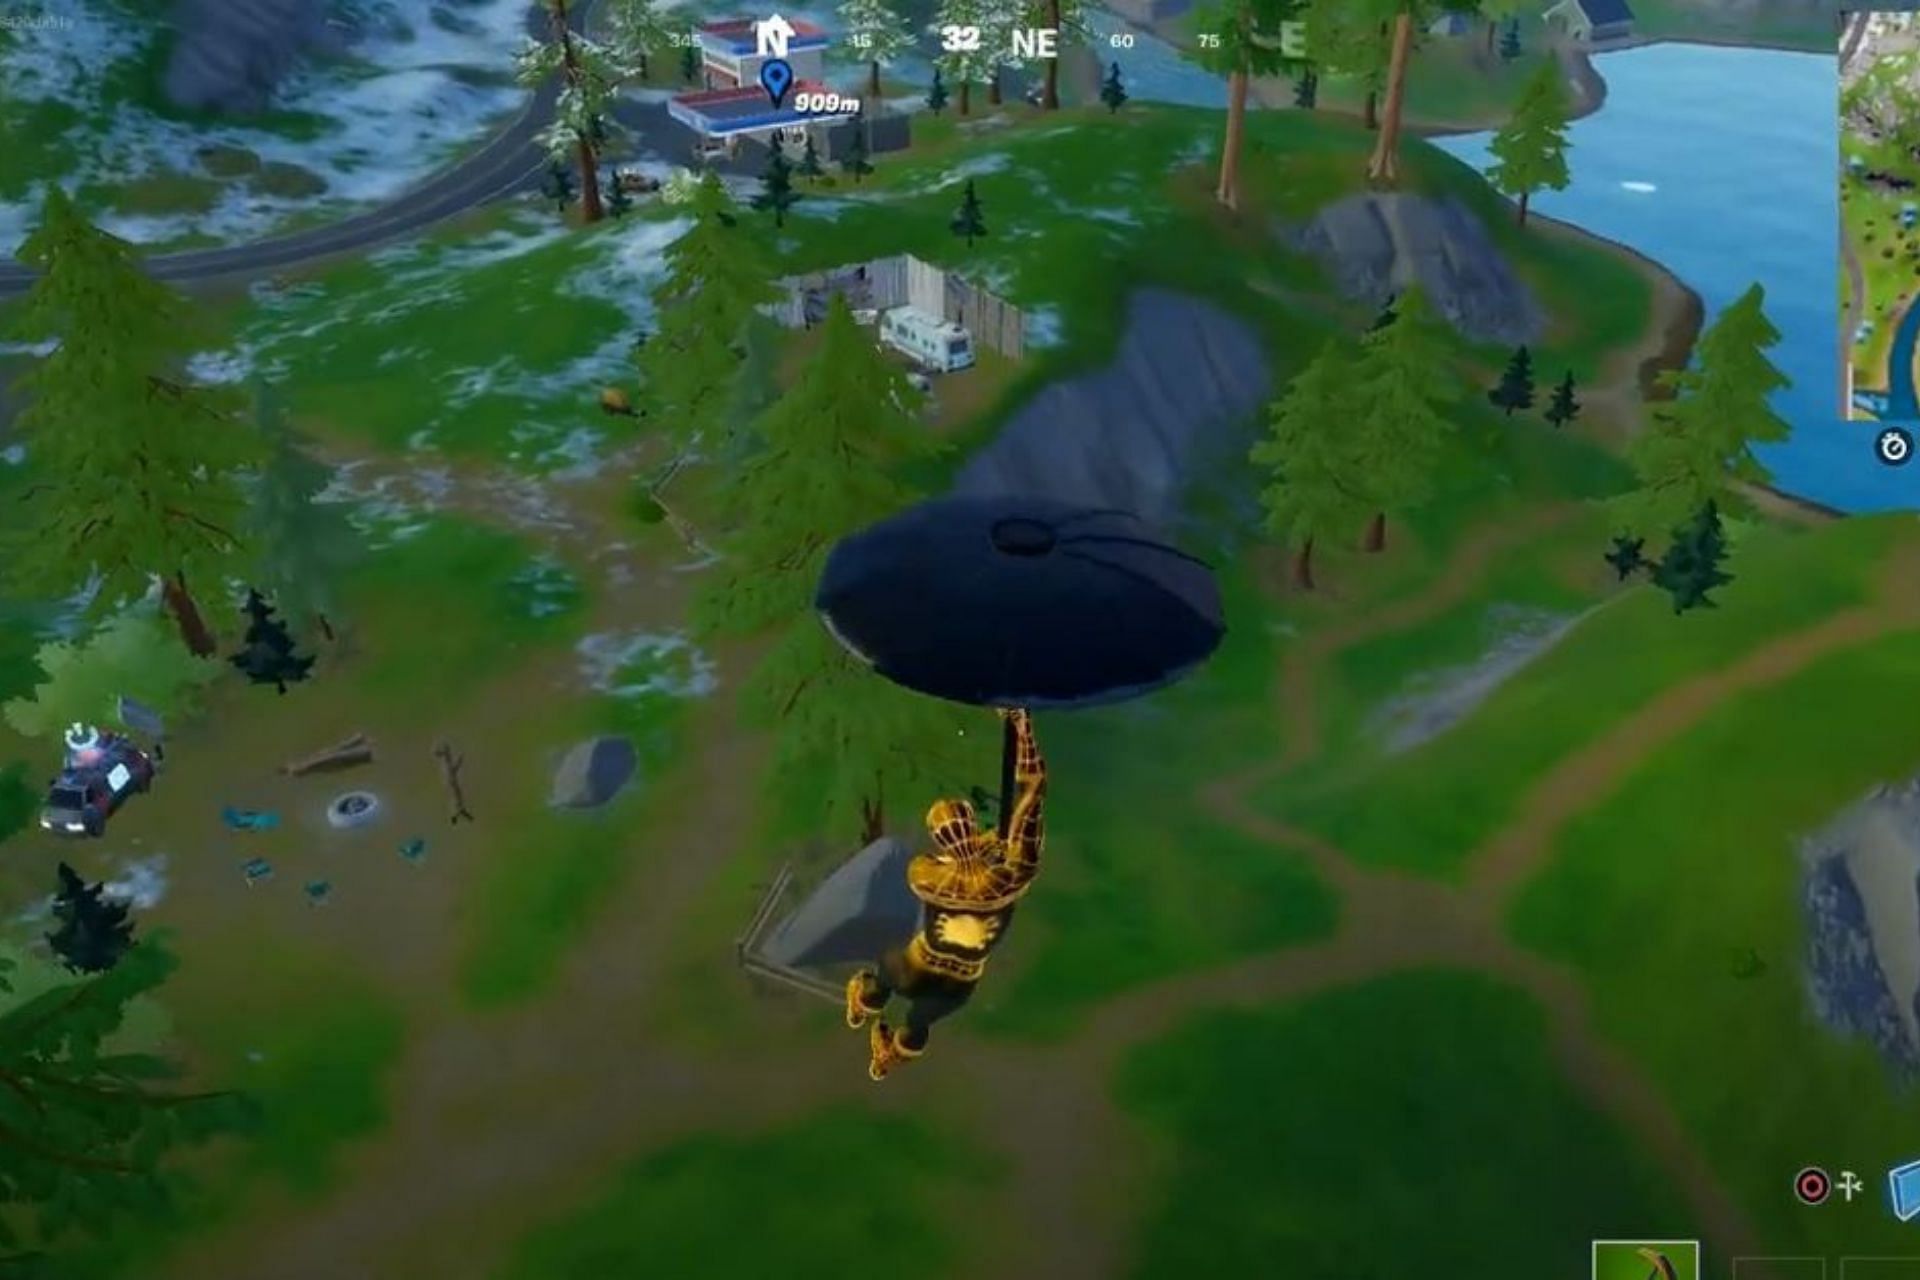 Players need to decorate Shell or High Water and Happy Campers with flamingo lawn decorations to complete a Week 14 quest in Fortnite Chapter 3 Season 1 (Image via YouTube/ FortniteCem)